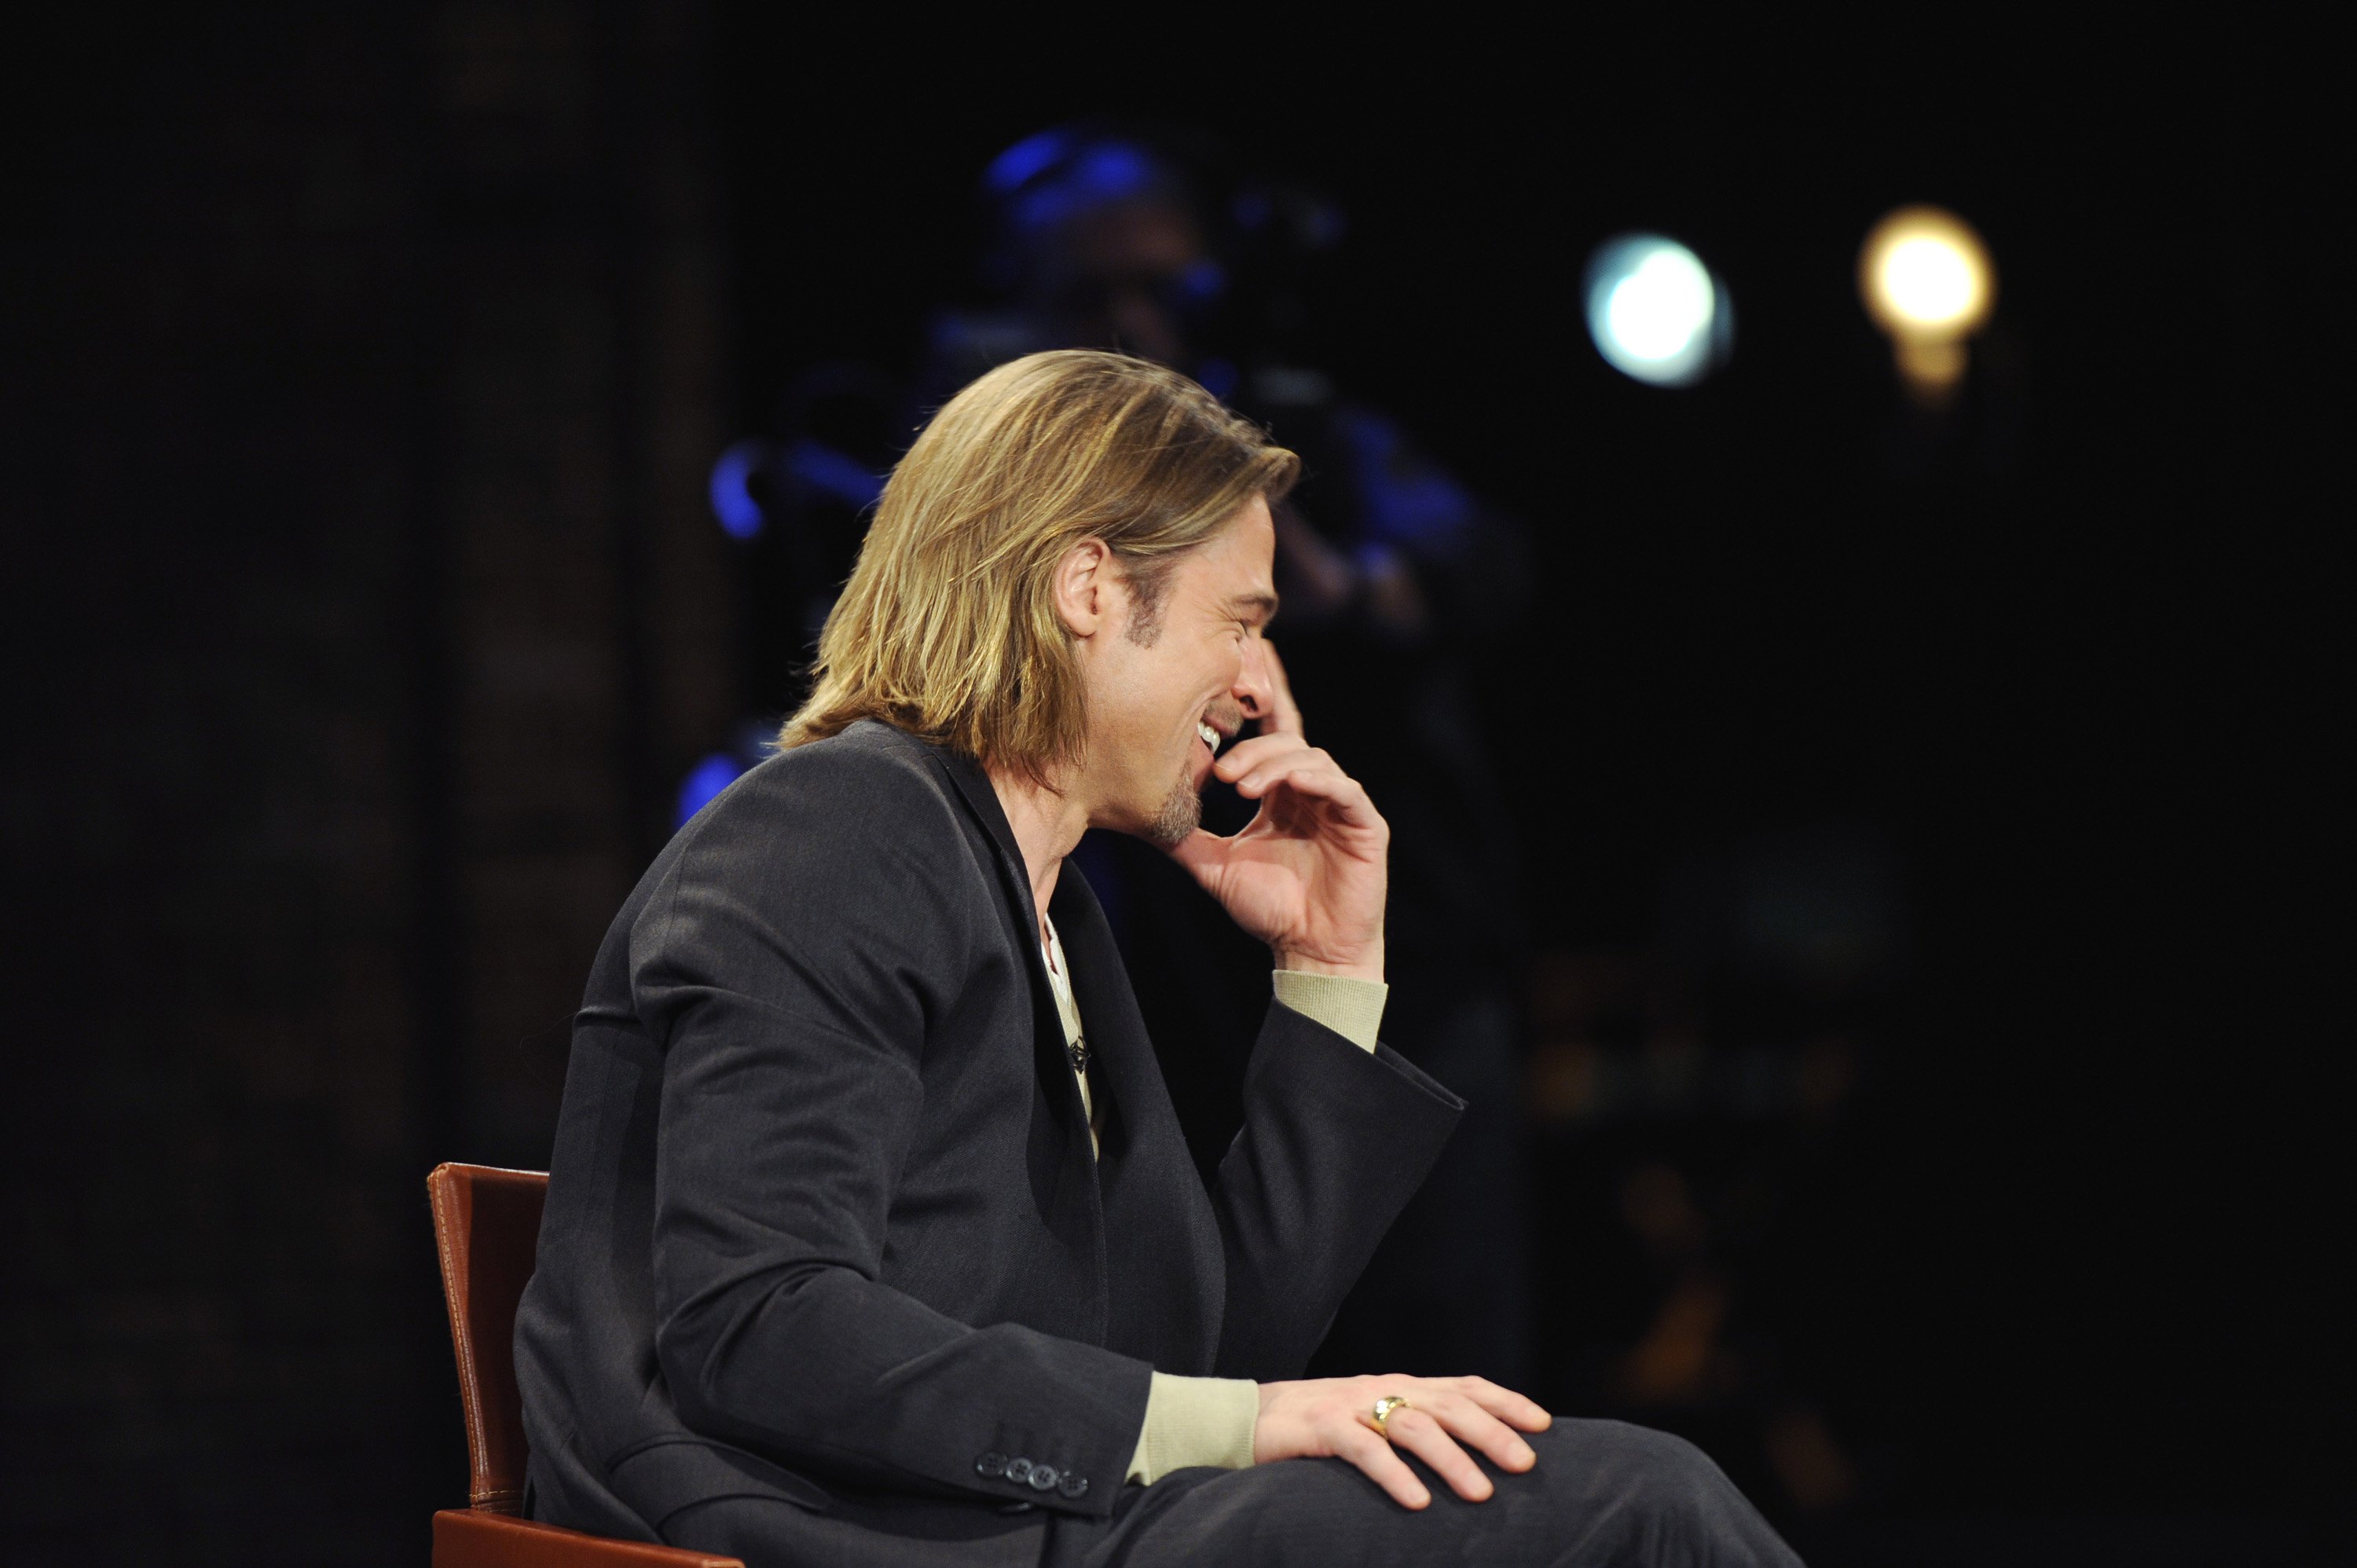 Brad Pitt on "Inside the Actors Studio" in 2010 | Source: Getty Images